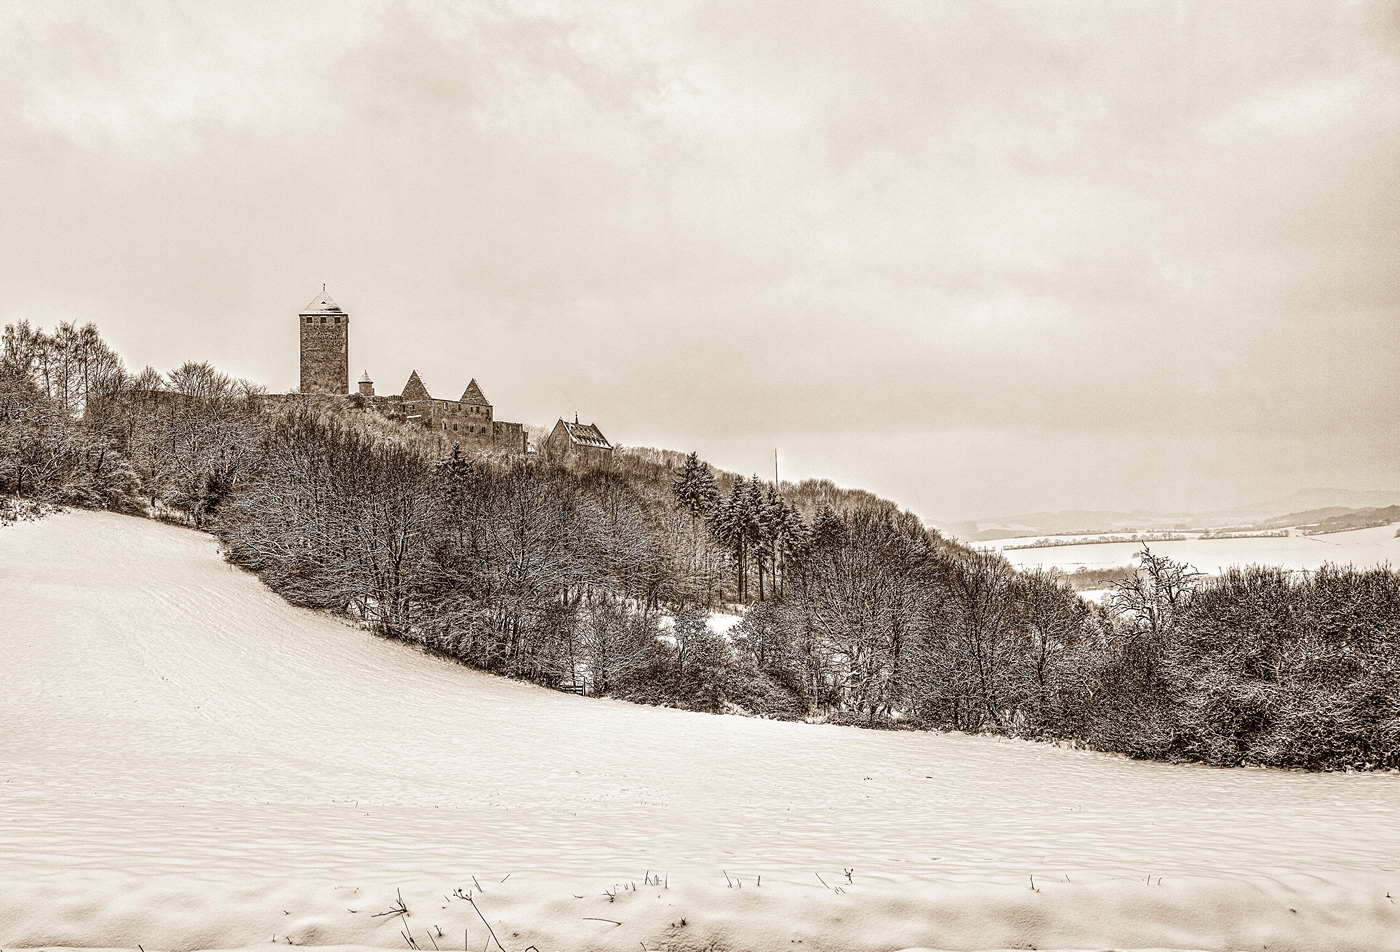 The Castle in the Snow